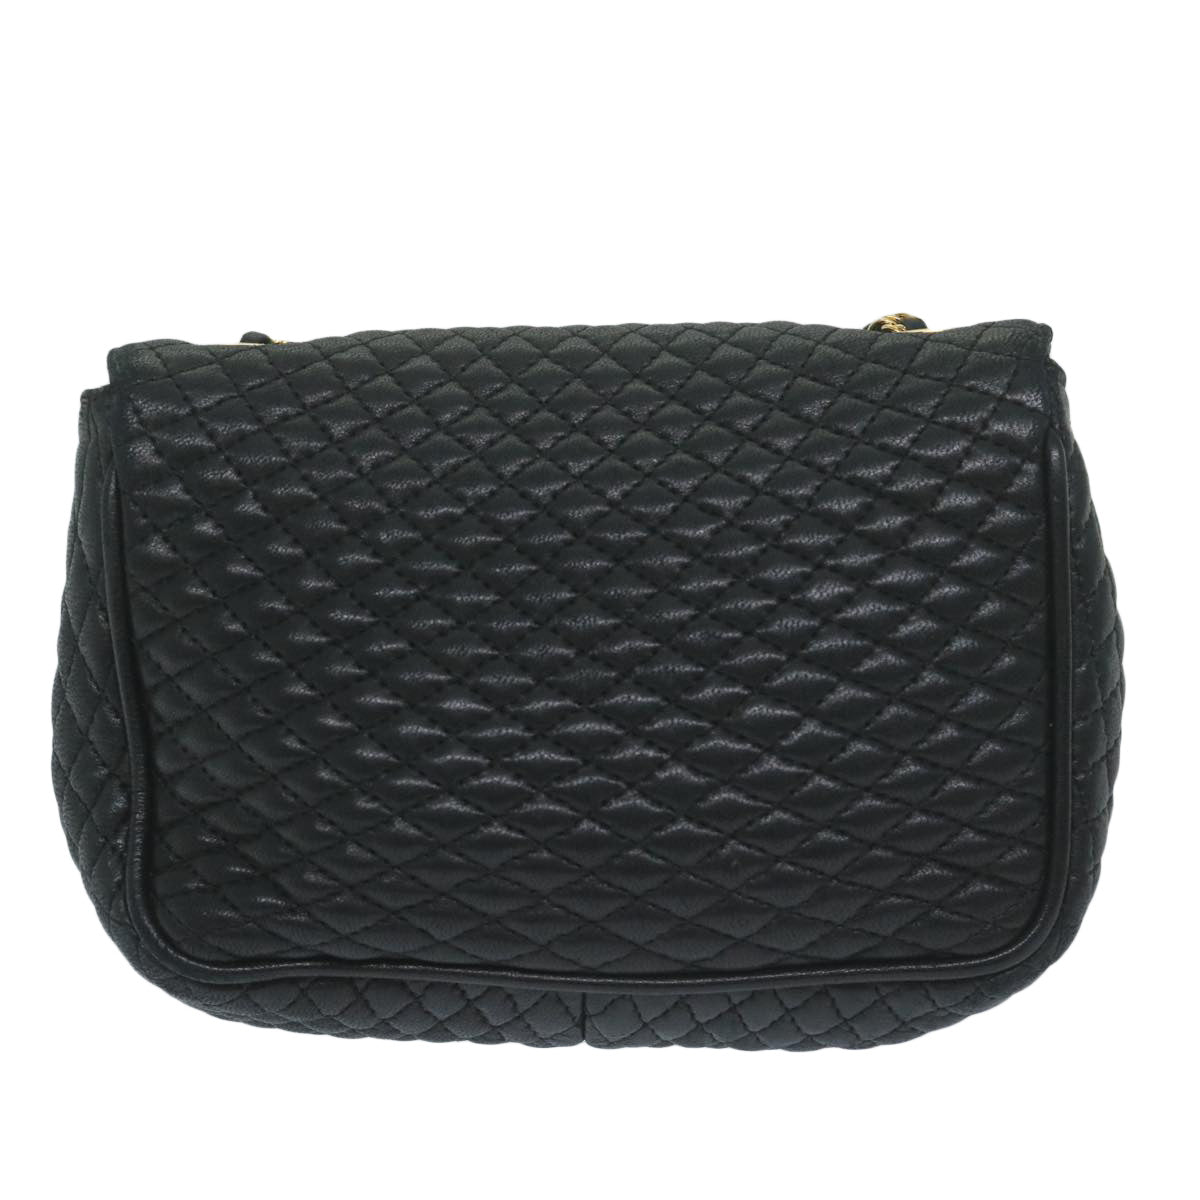 BALLY Quilted Chain Shoulder Bag Leather Black Auth yk10119 - 0